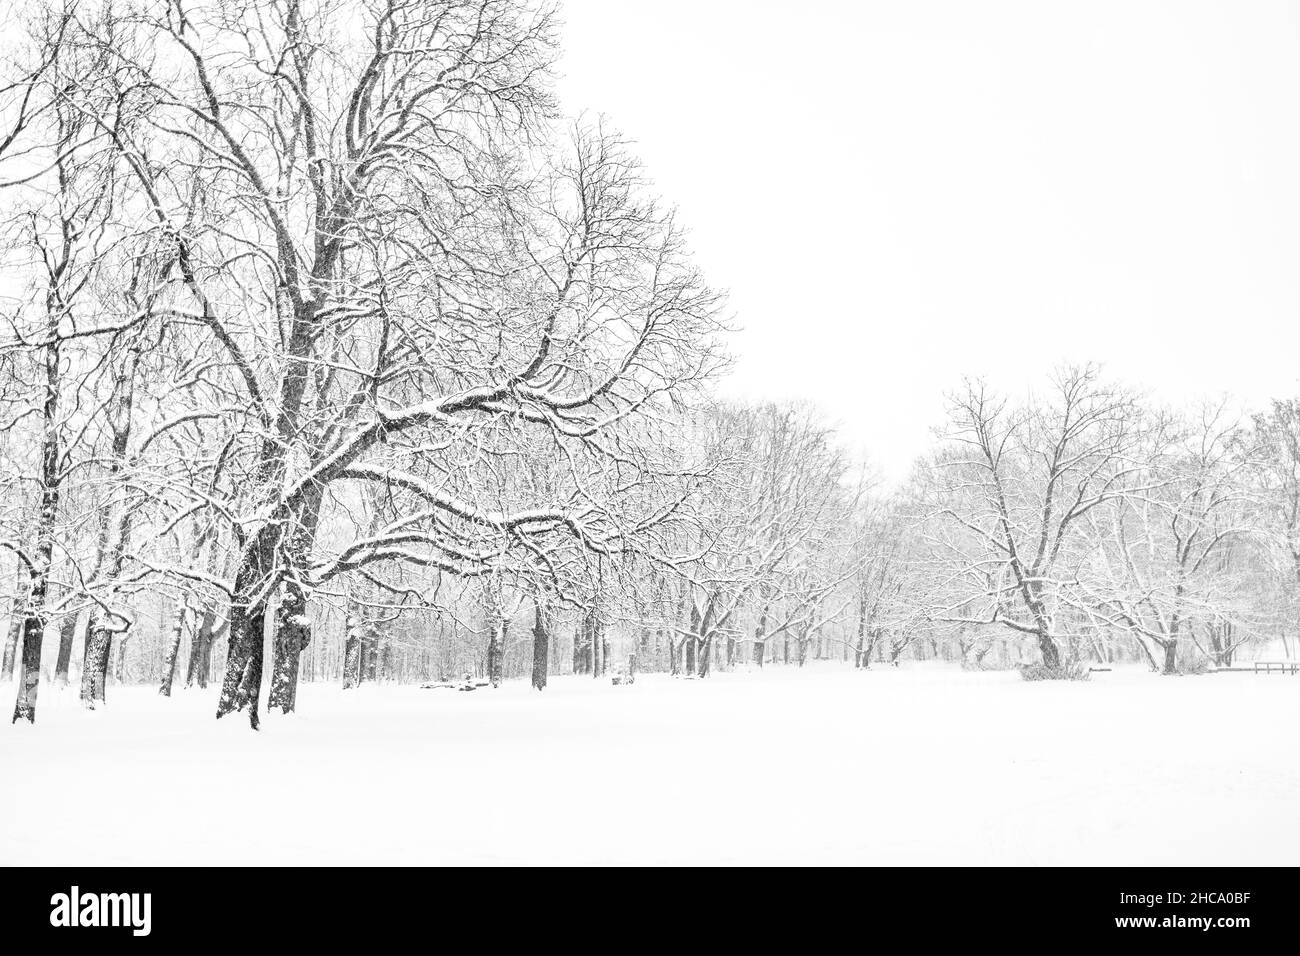 Beautiful view of a winter landscape with trees covered in snow Stock Photo